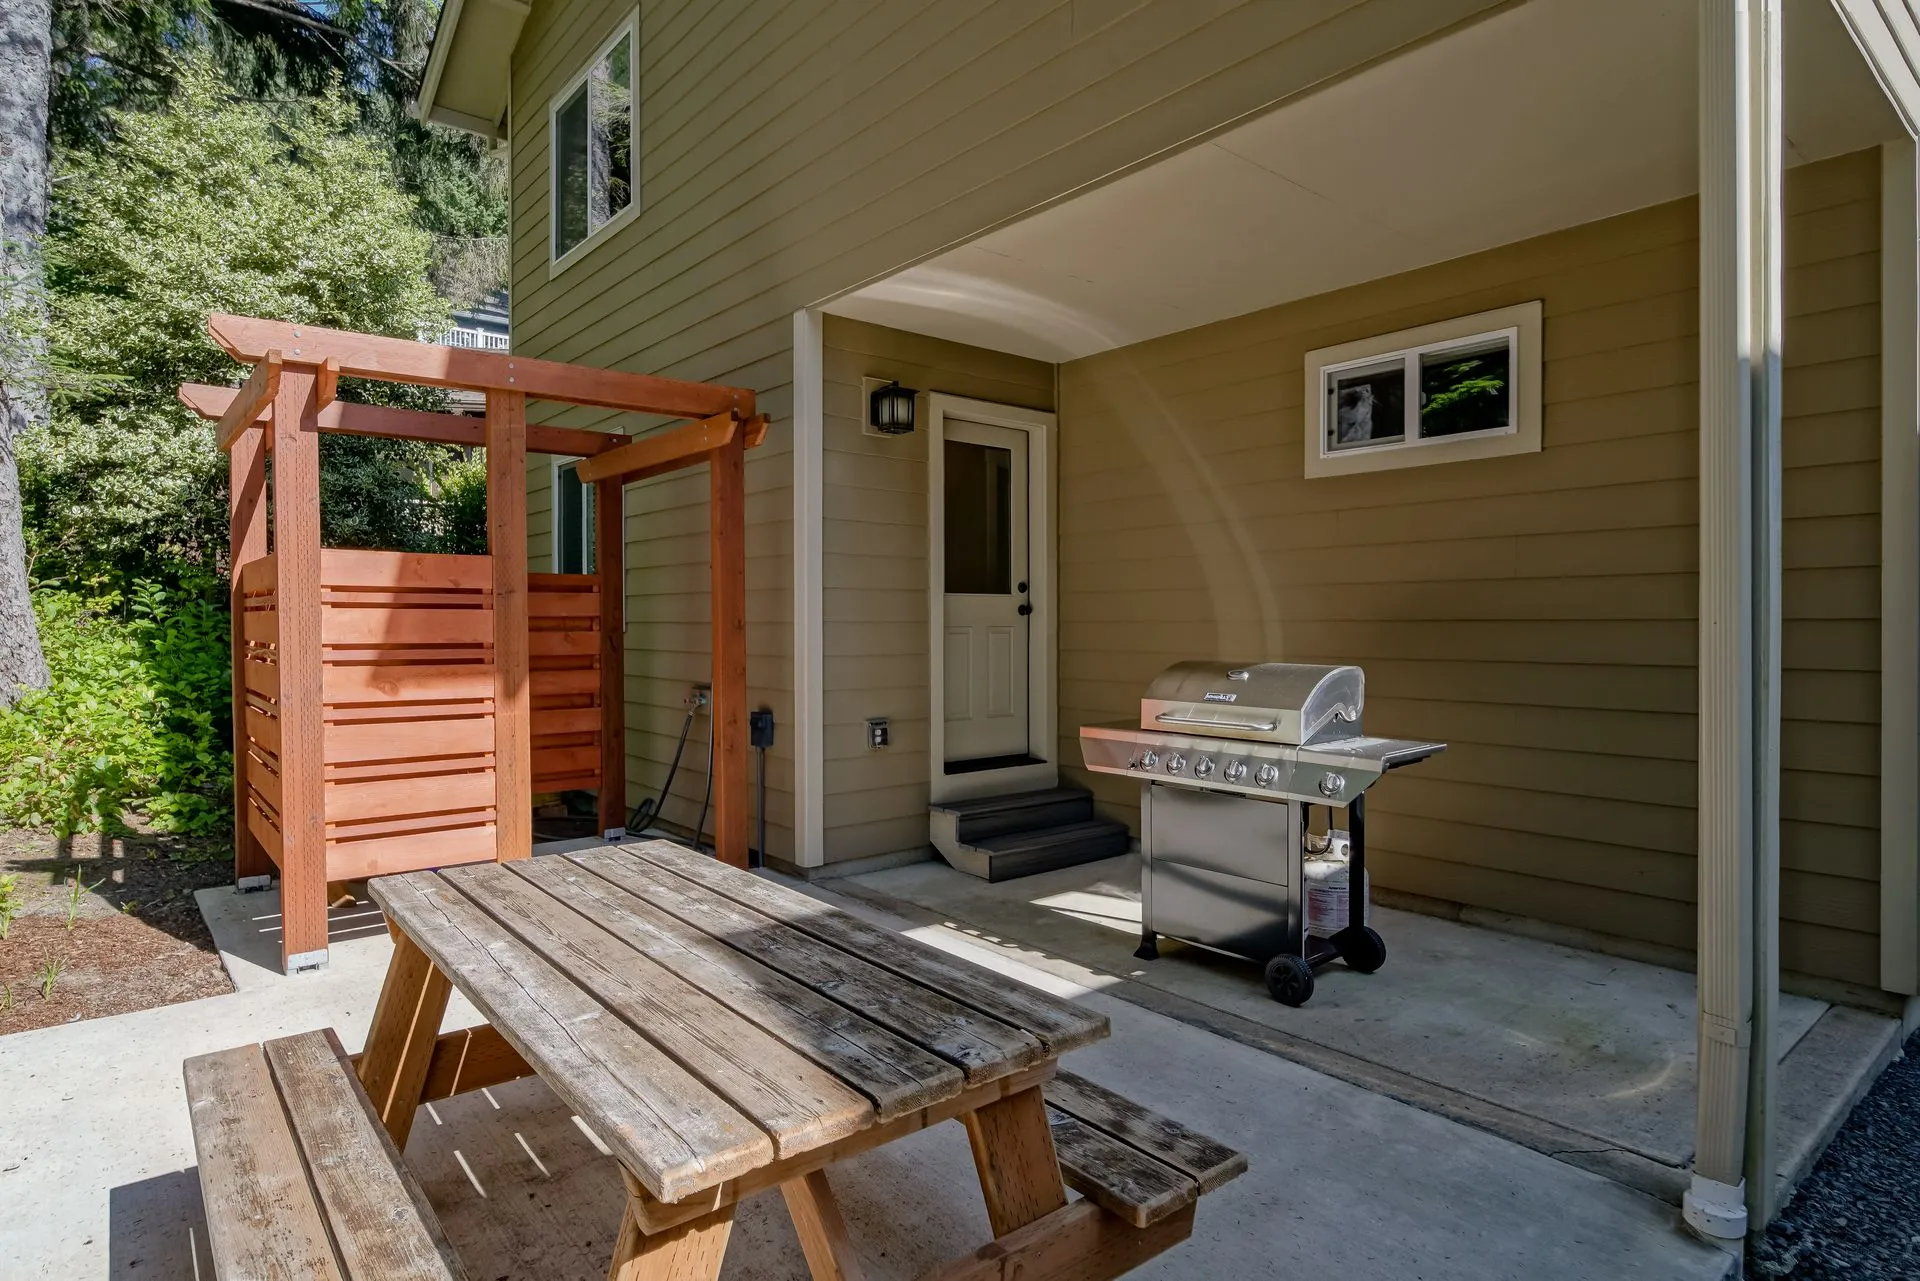 Vacation Rental in Cannon Beach, Seven Spruce picnic table and grill